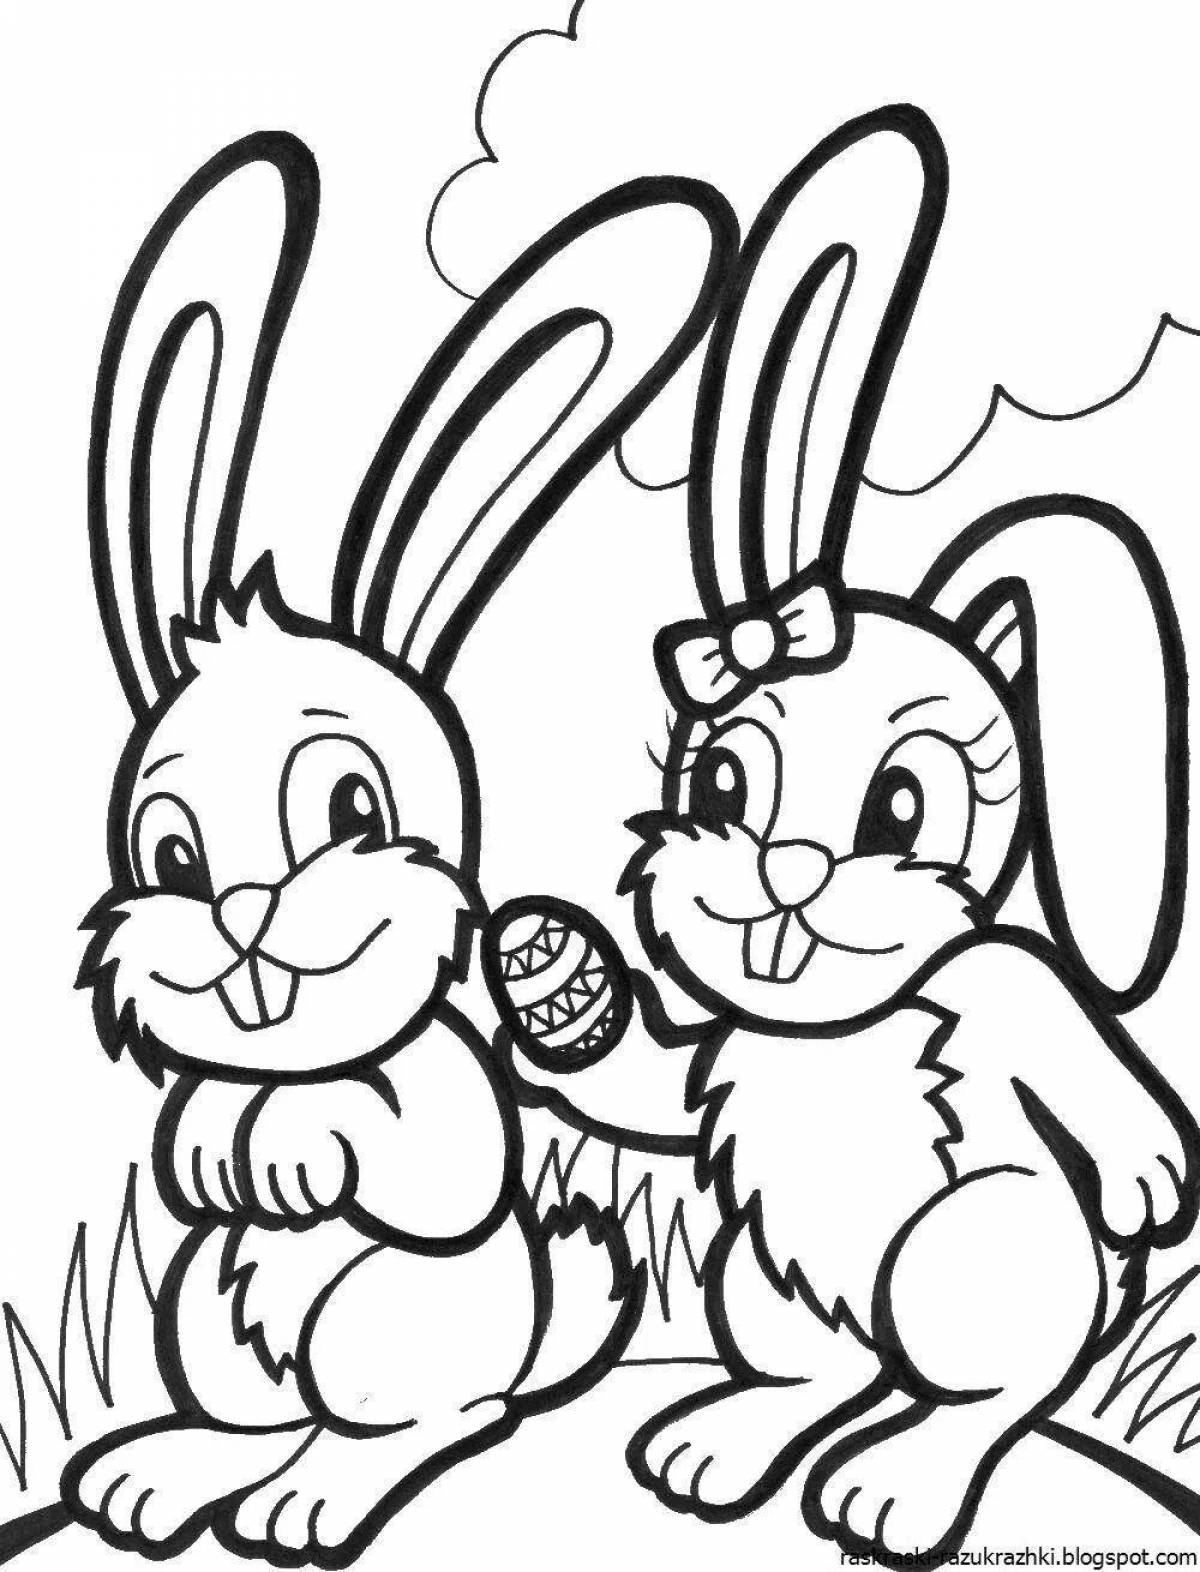 Sparkling Bunny coloring book for kids